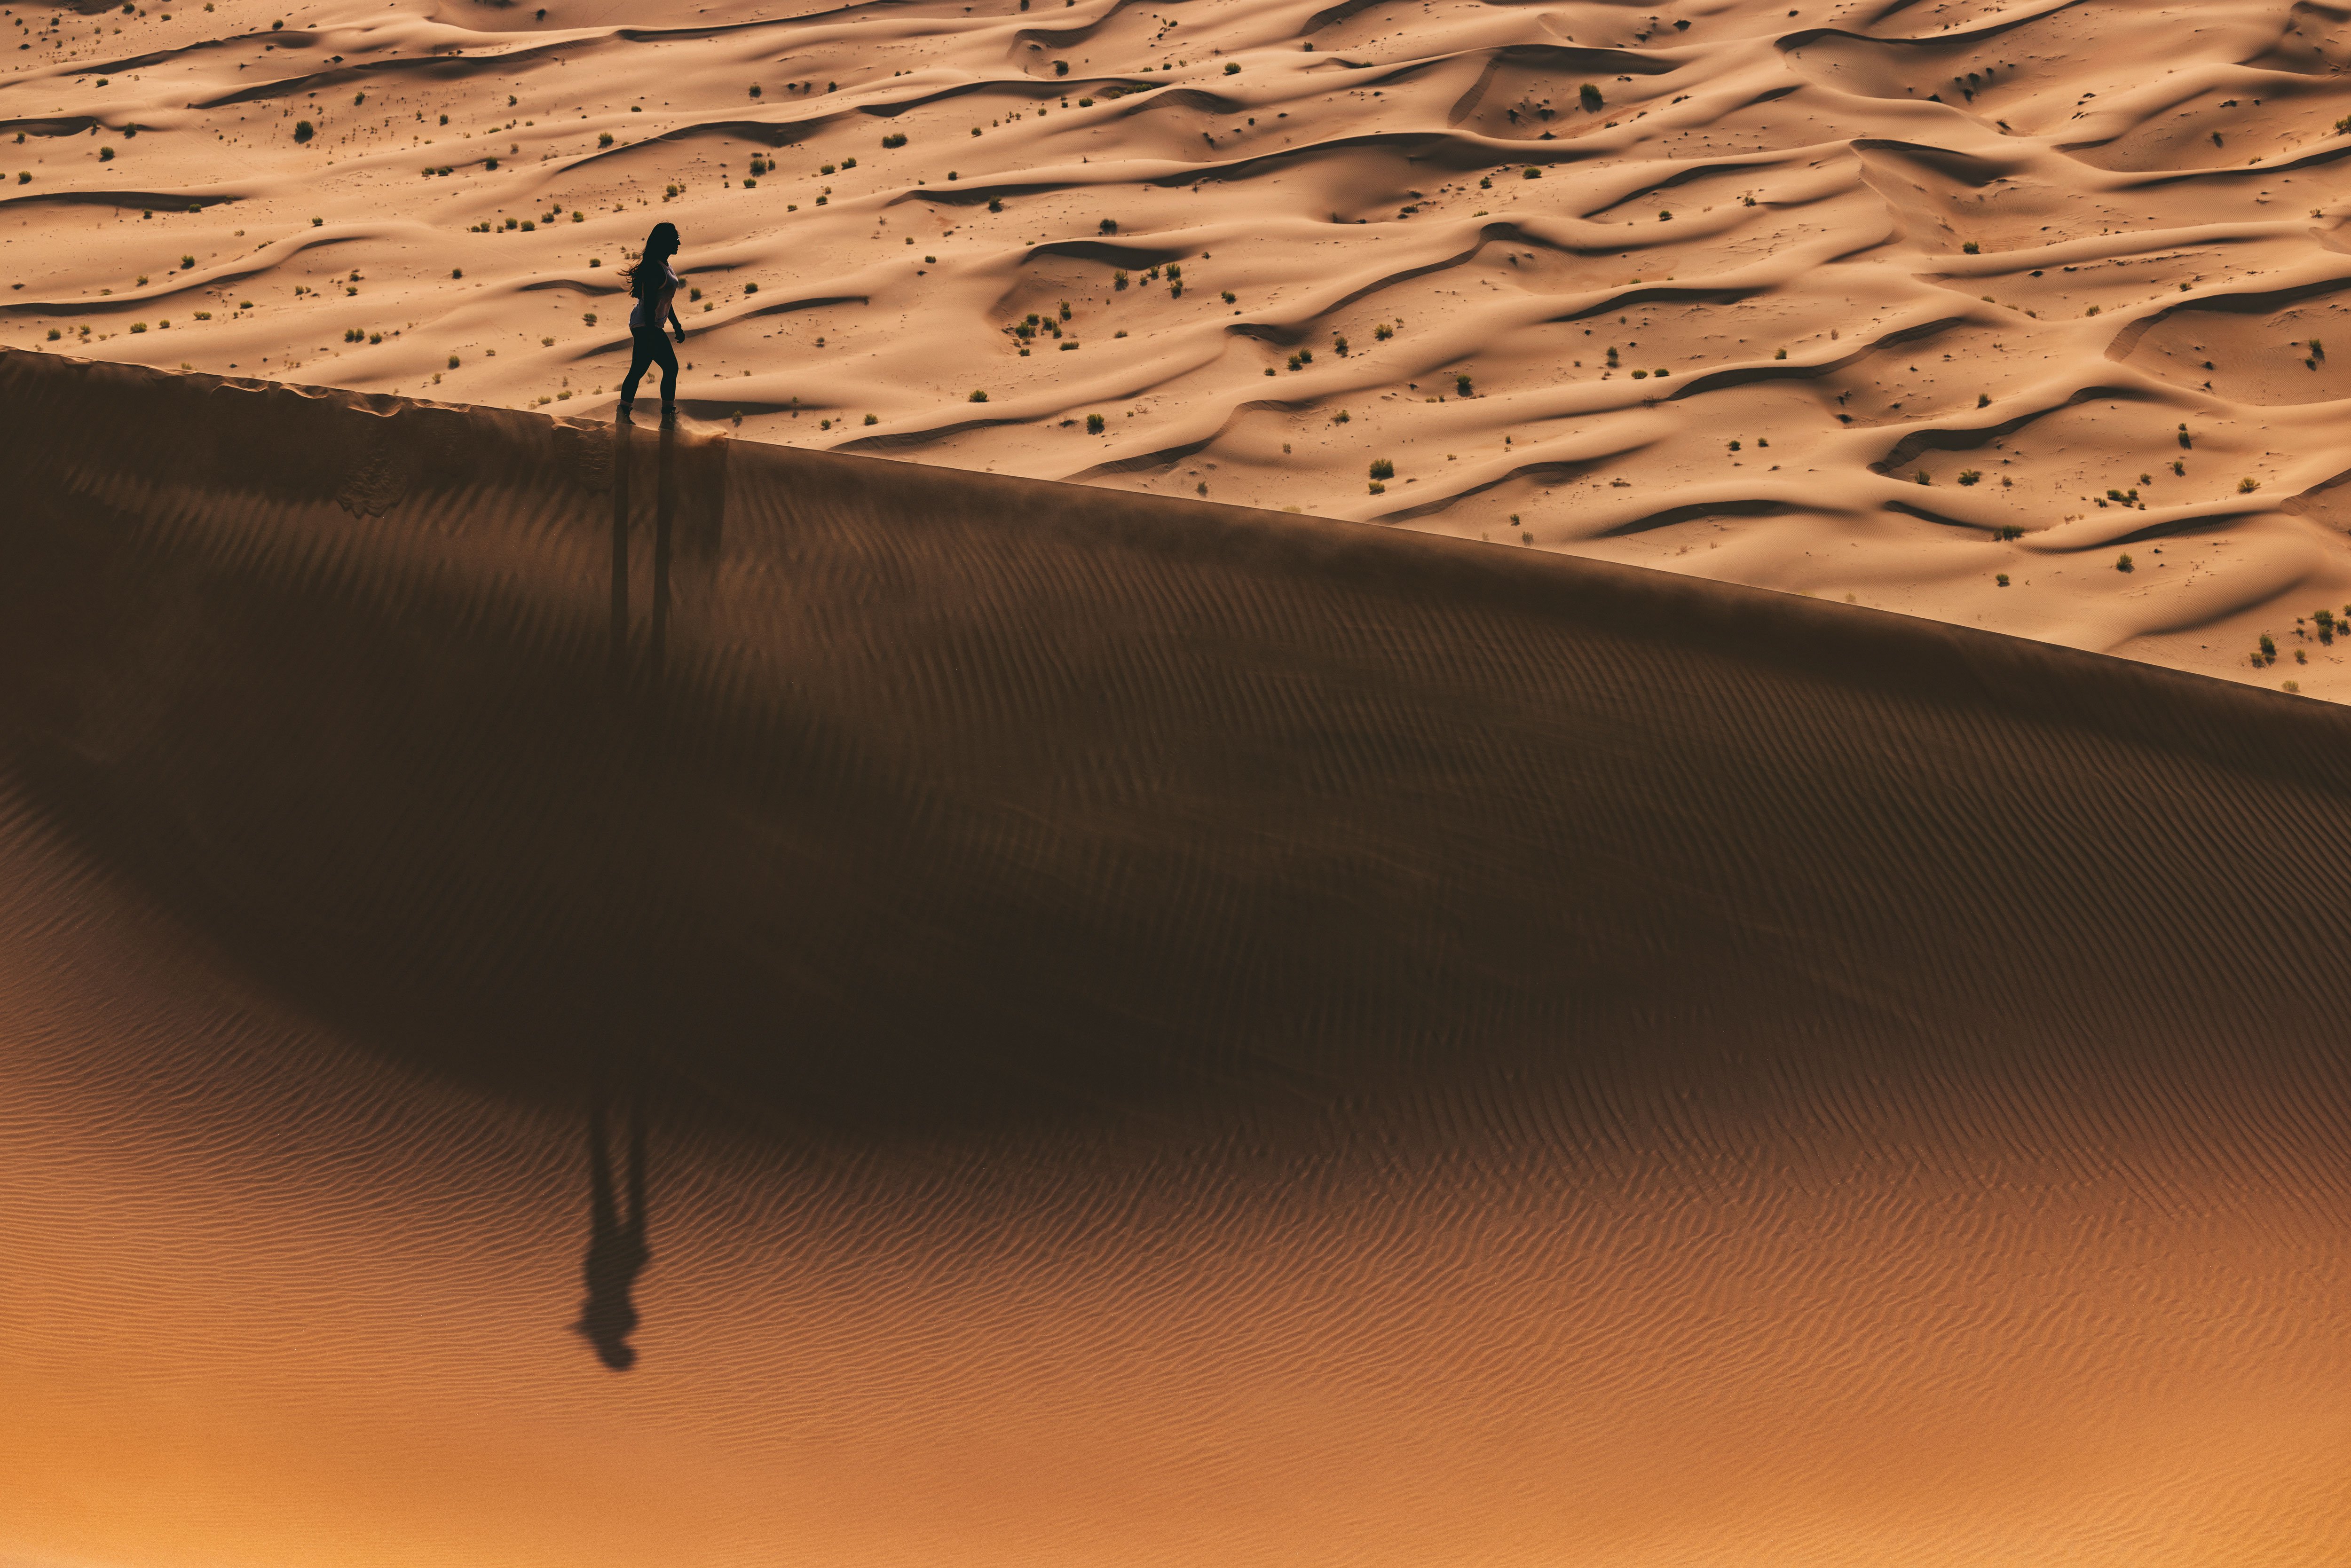 Woman walking in the middle of sand dunes in the Abu Dhabi desert